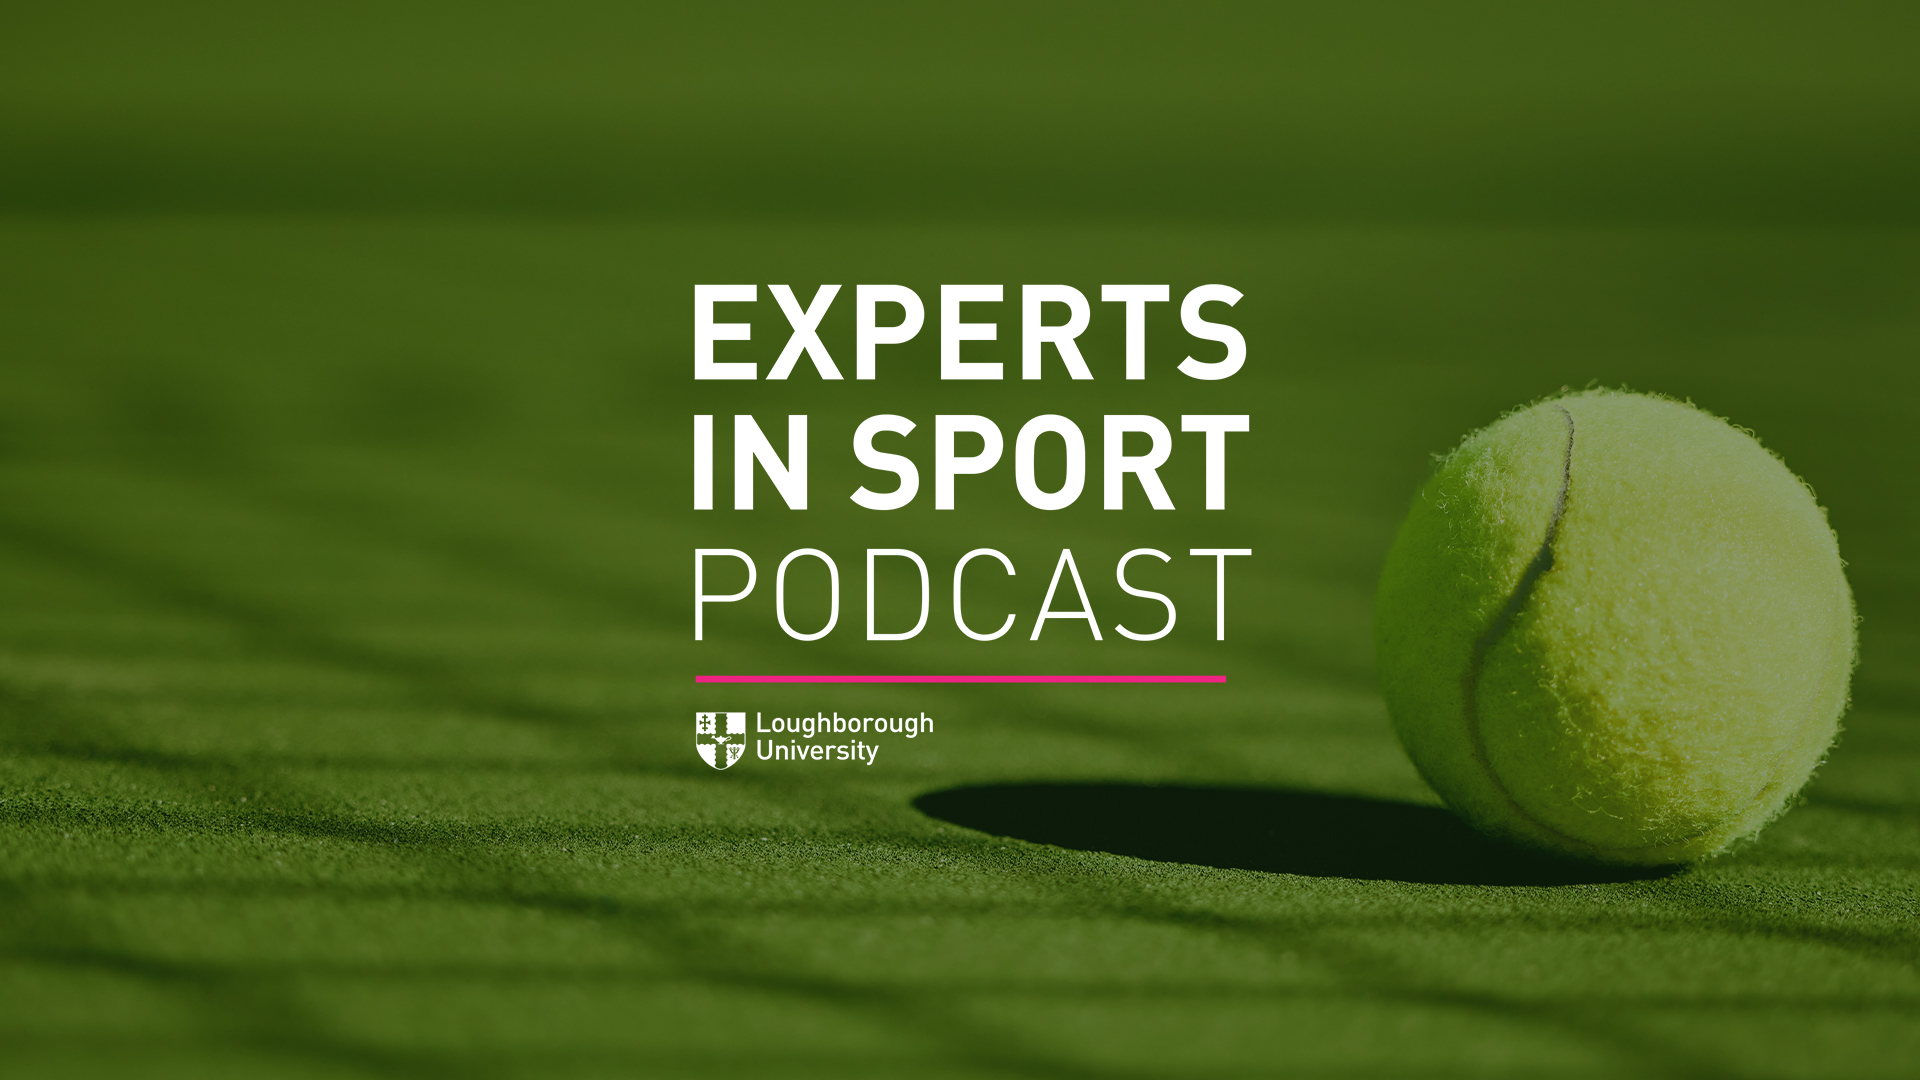 Experts in Sport logo overlaid on an image of a tennis ball on a court